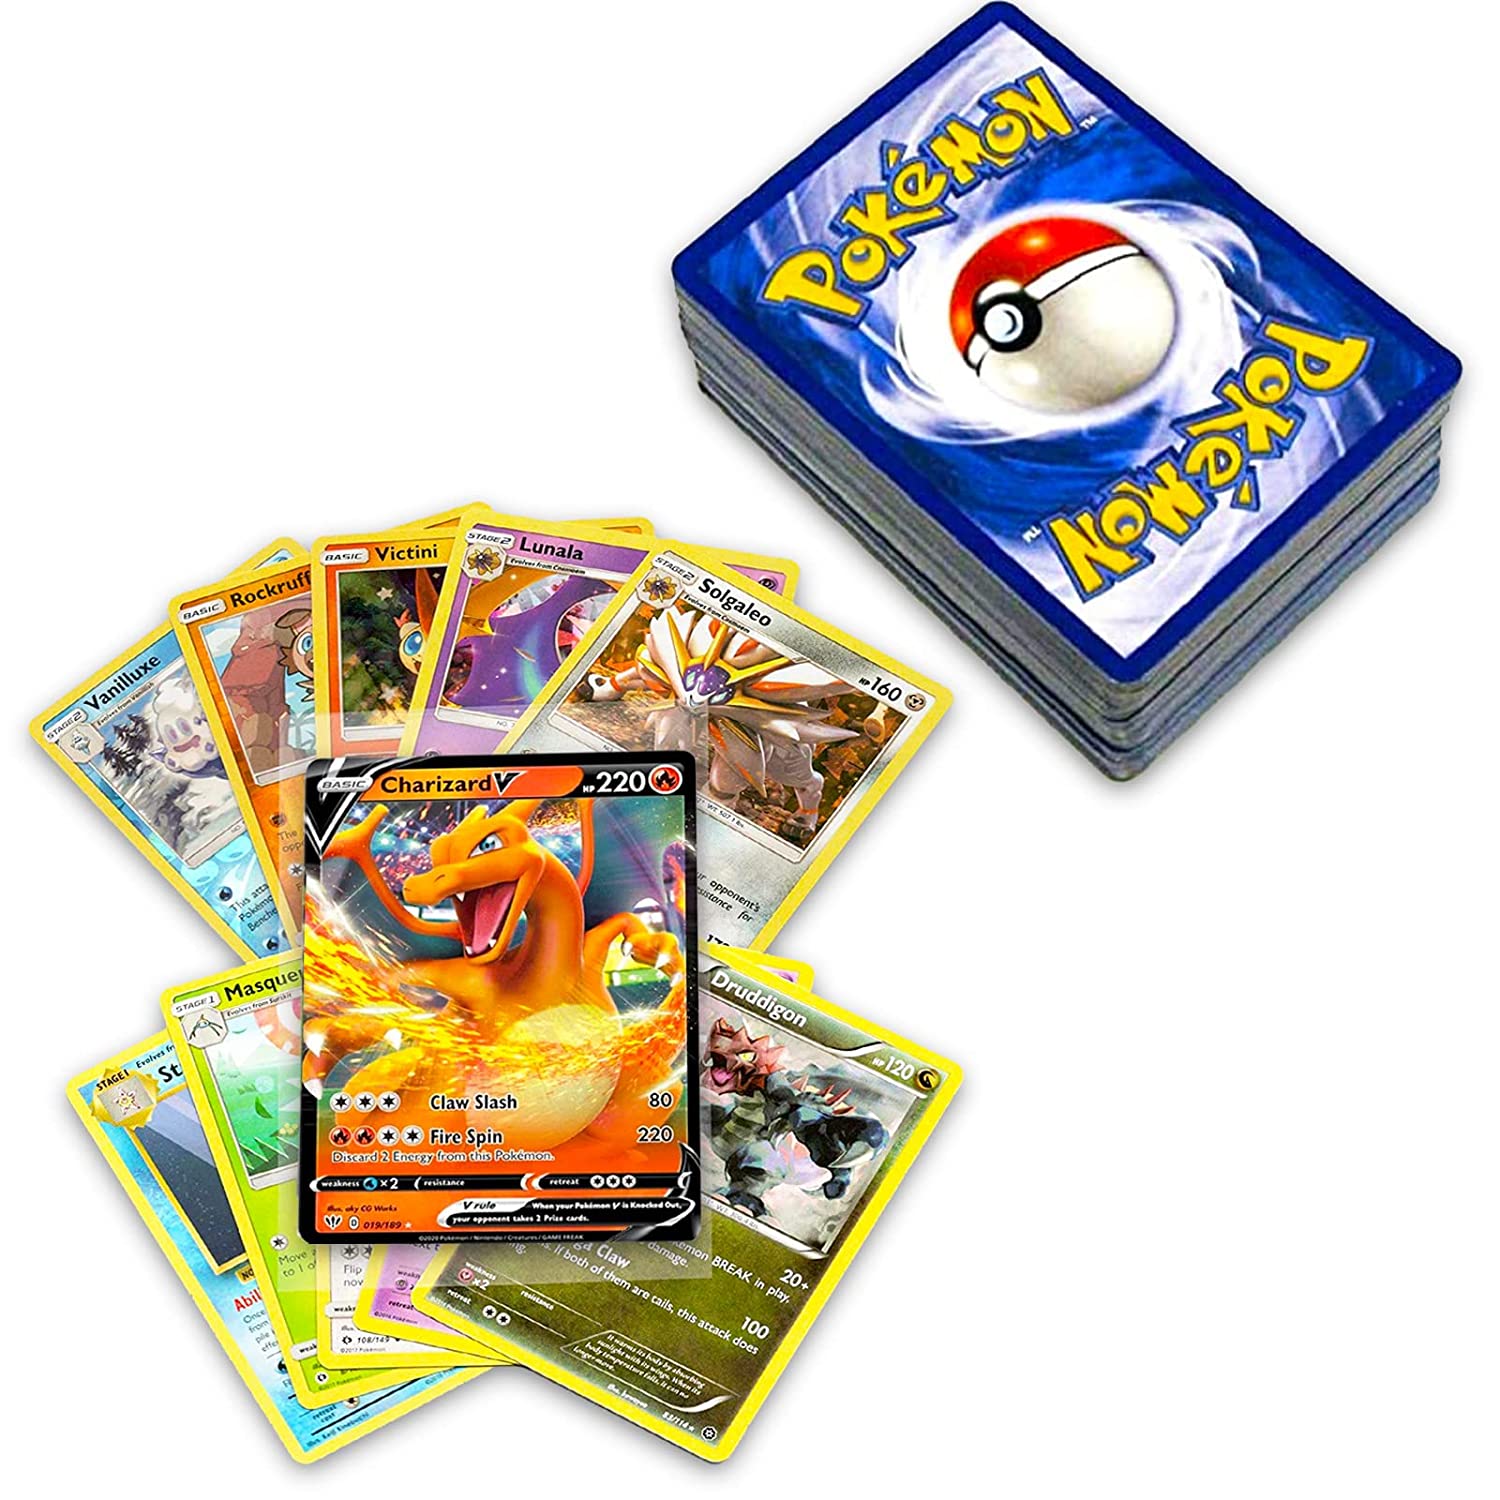 How to tell if a Pokemon card is 1st edition?